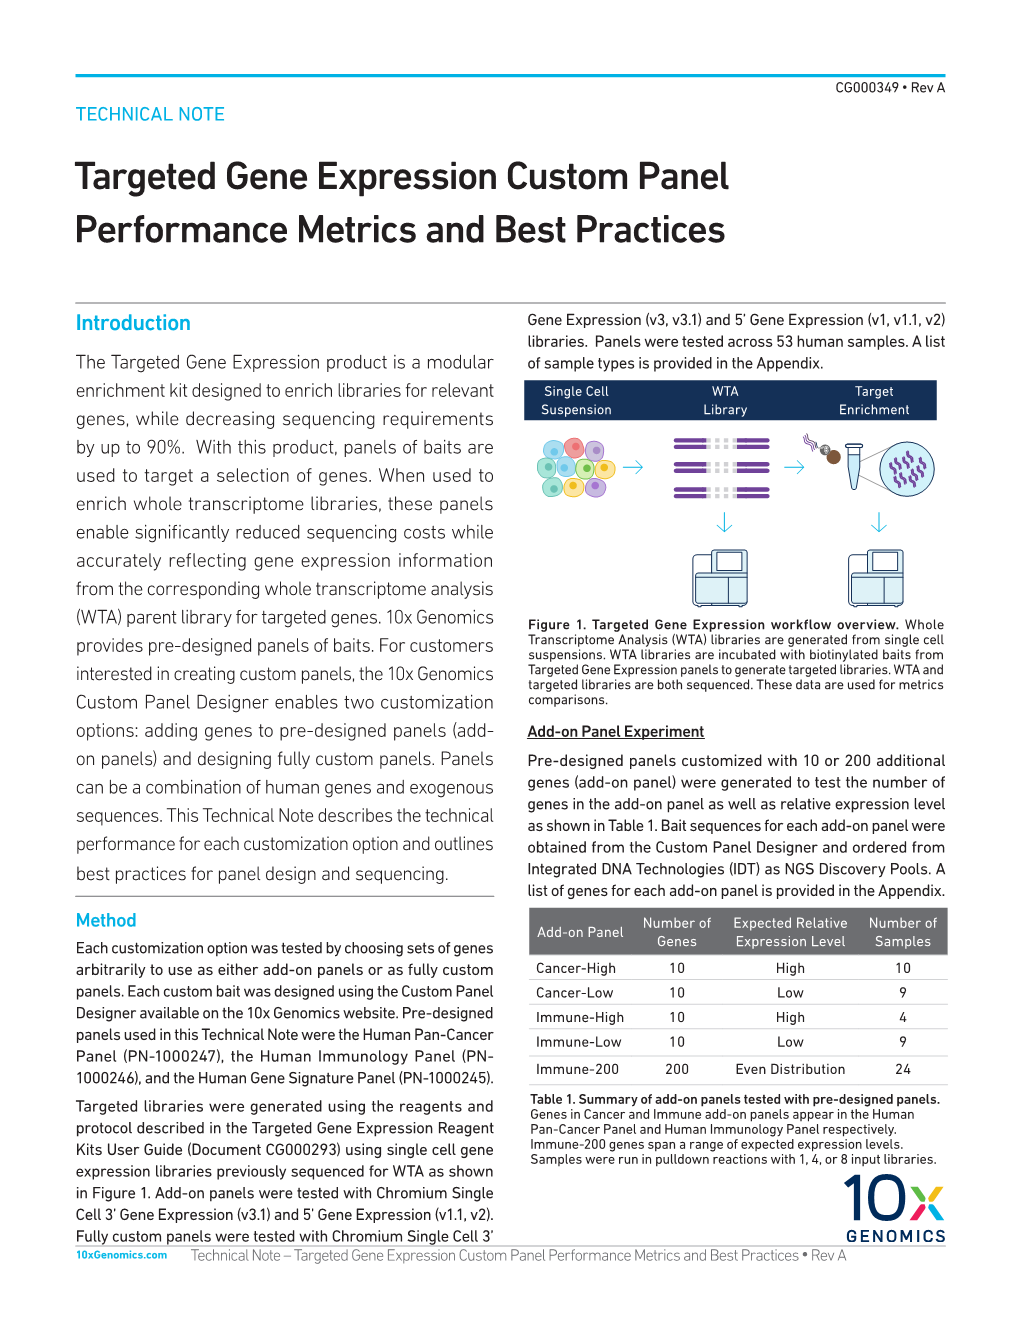 Targeted Gene Expression Custom Panel Performance Metrics and Best Practices